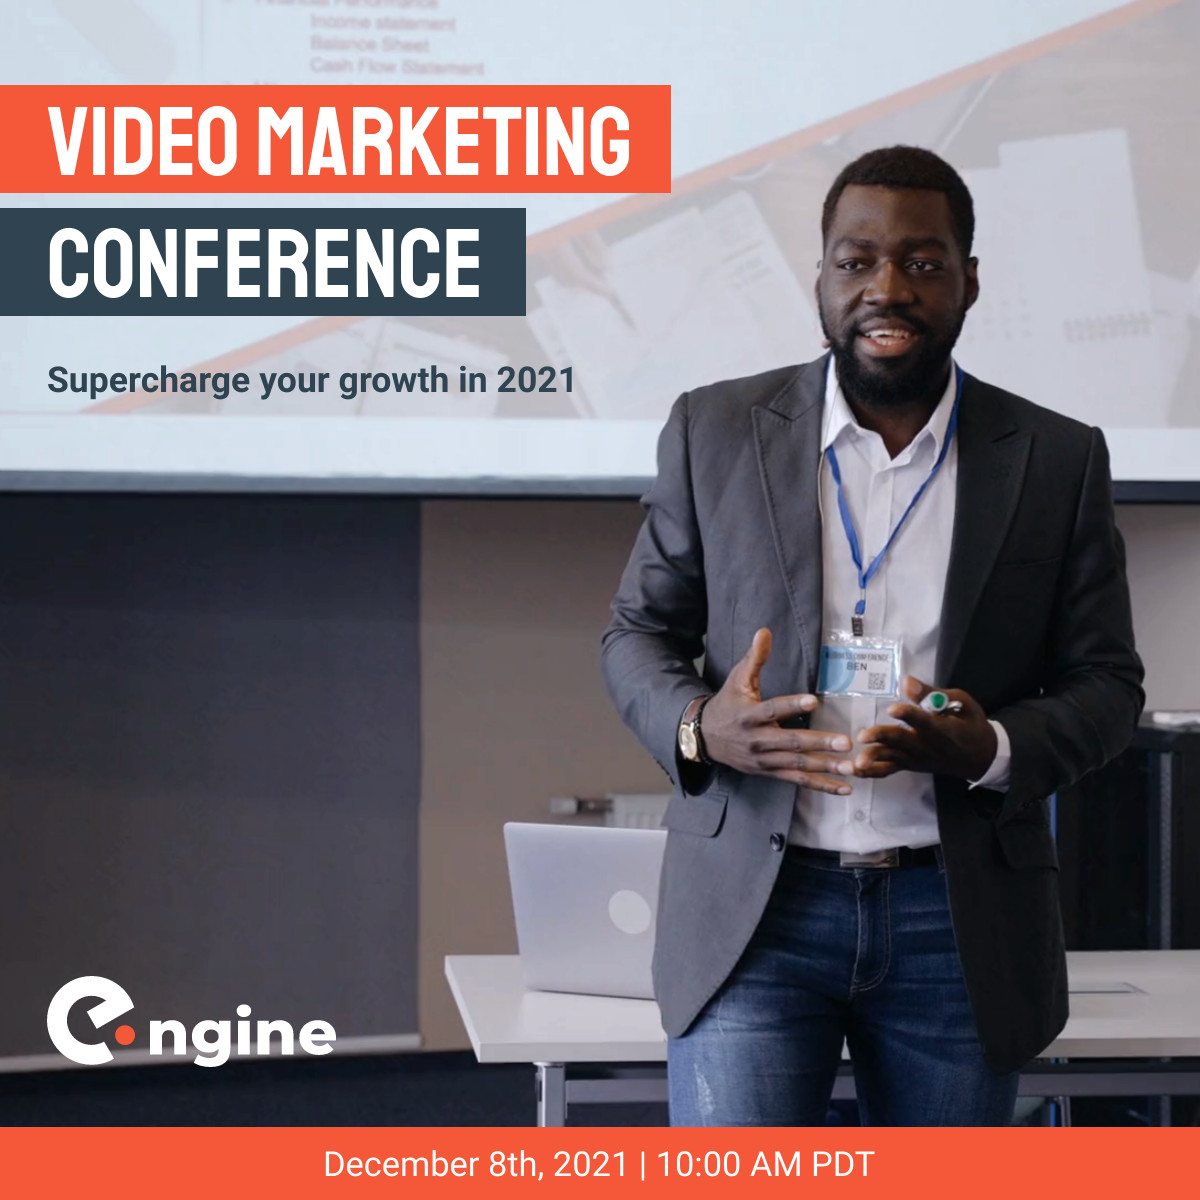 Video Marketing Supercharge Conference Video